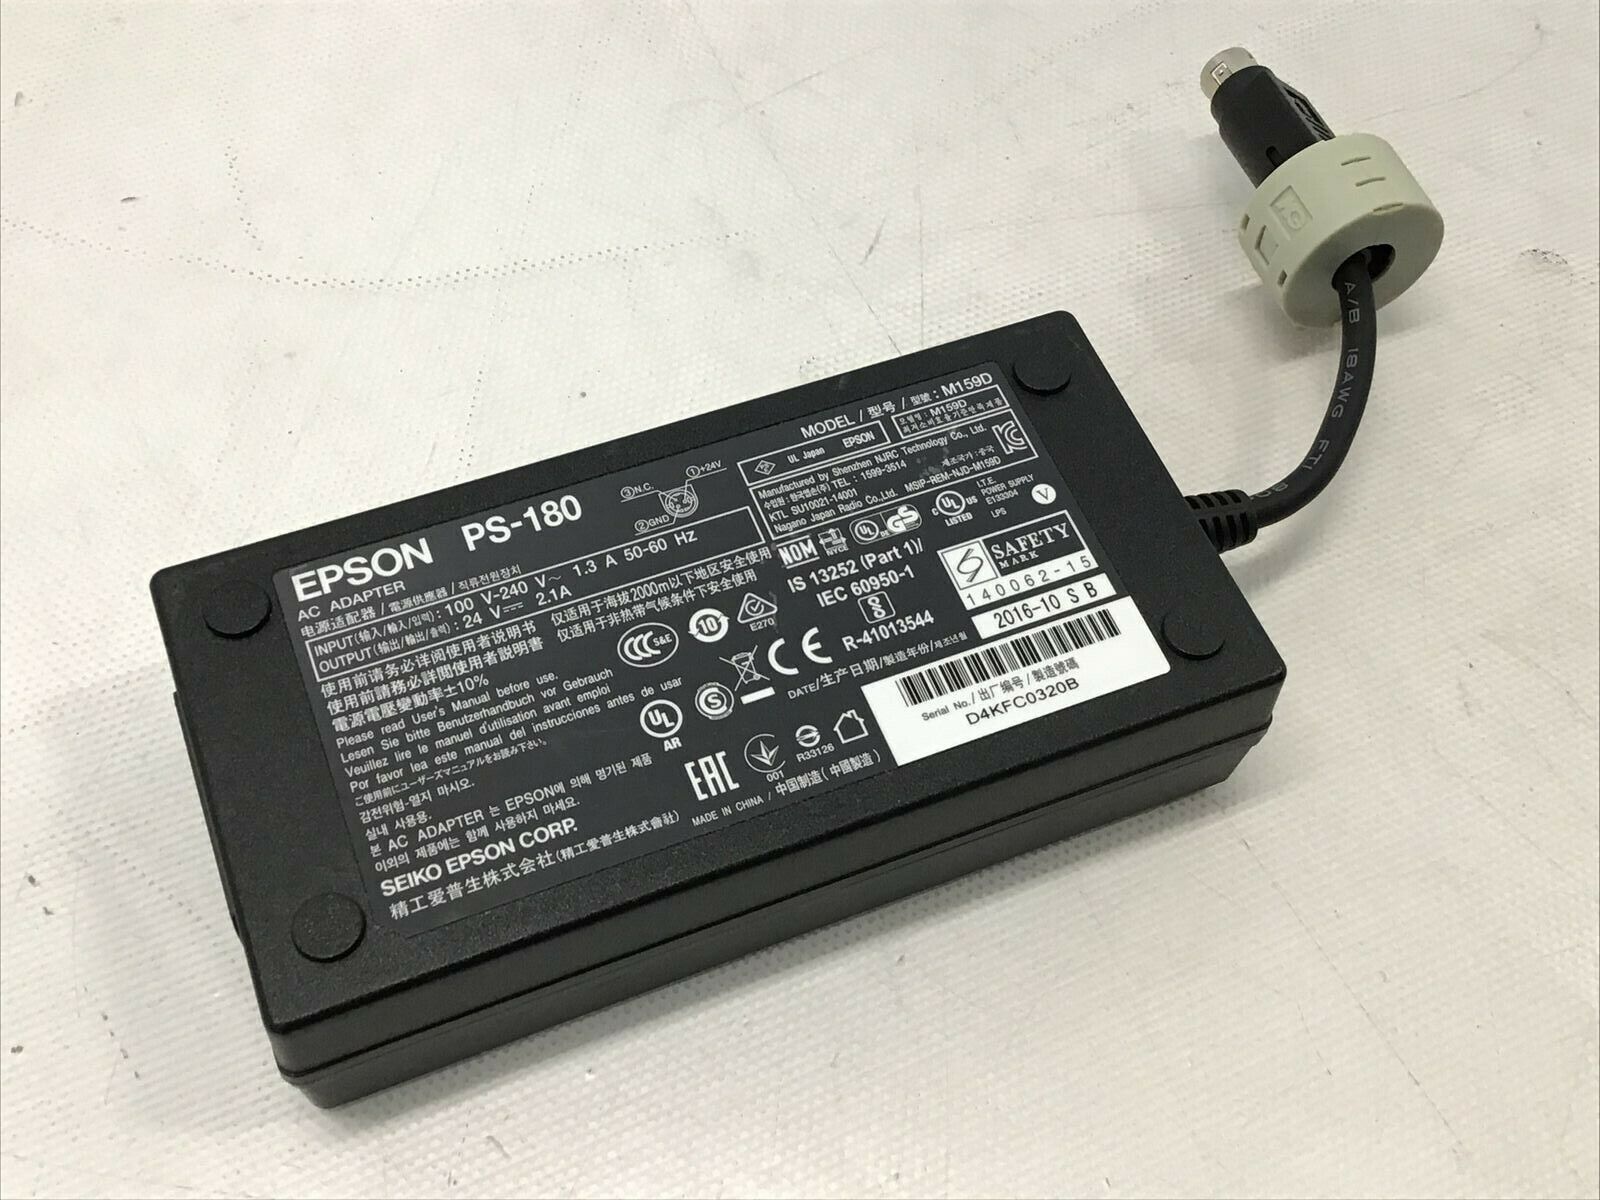 Epson PS-180 AC Adapter M159B M159A Printer C8255343 TM-T88V M244A Compatible Brand: EPSON Type: Epson PS-180 AC A